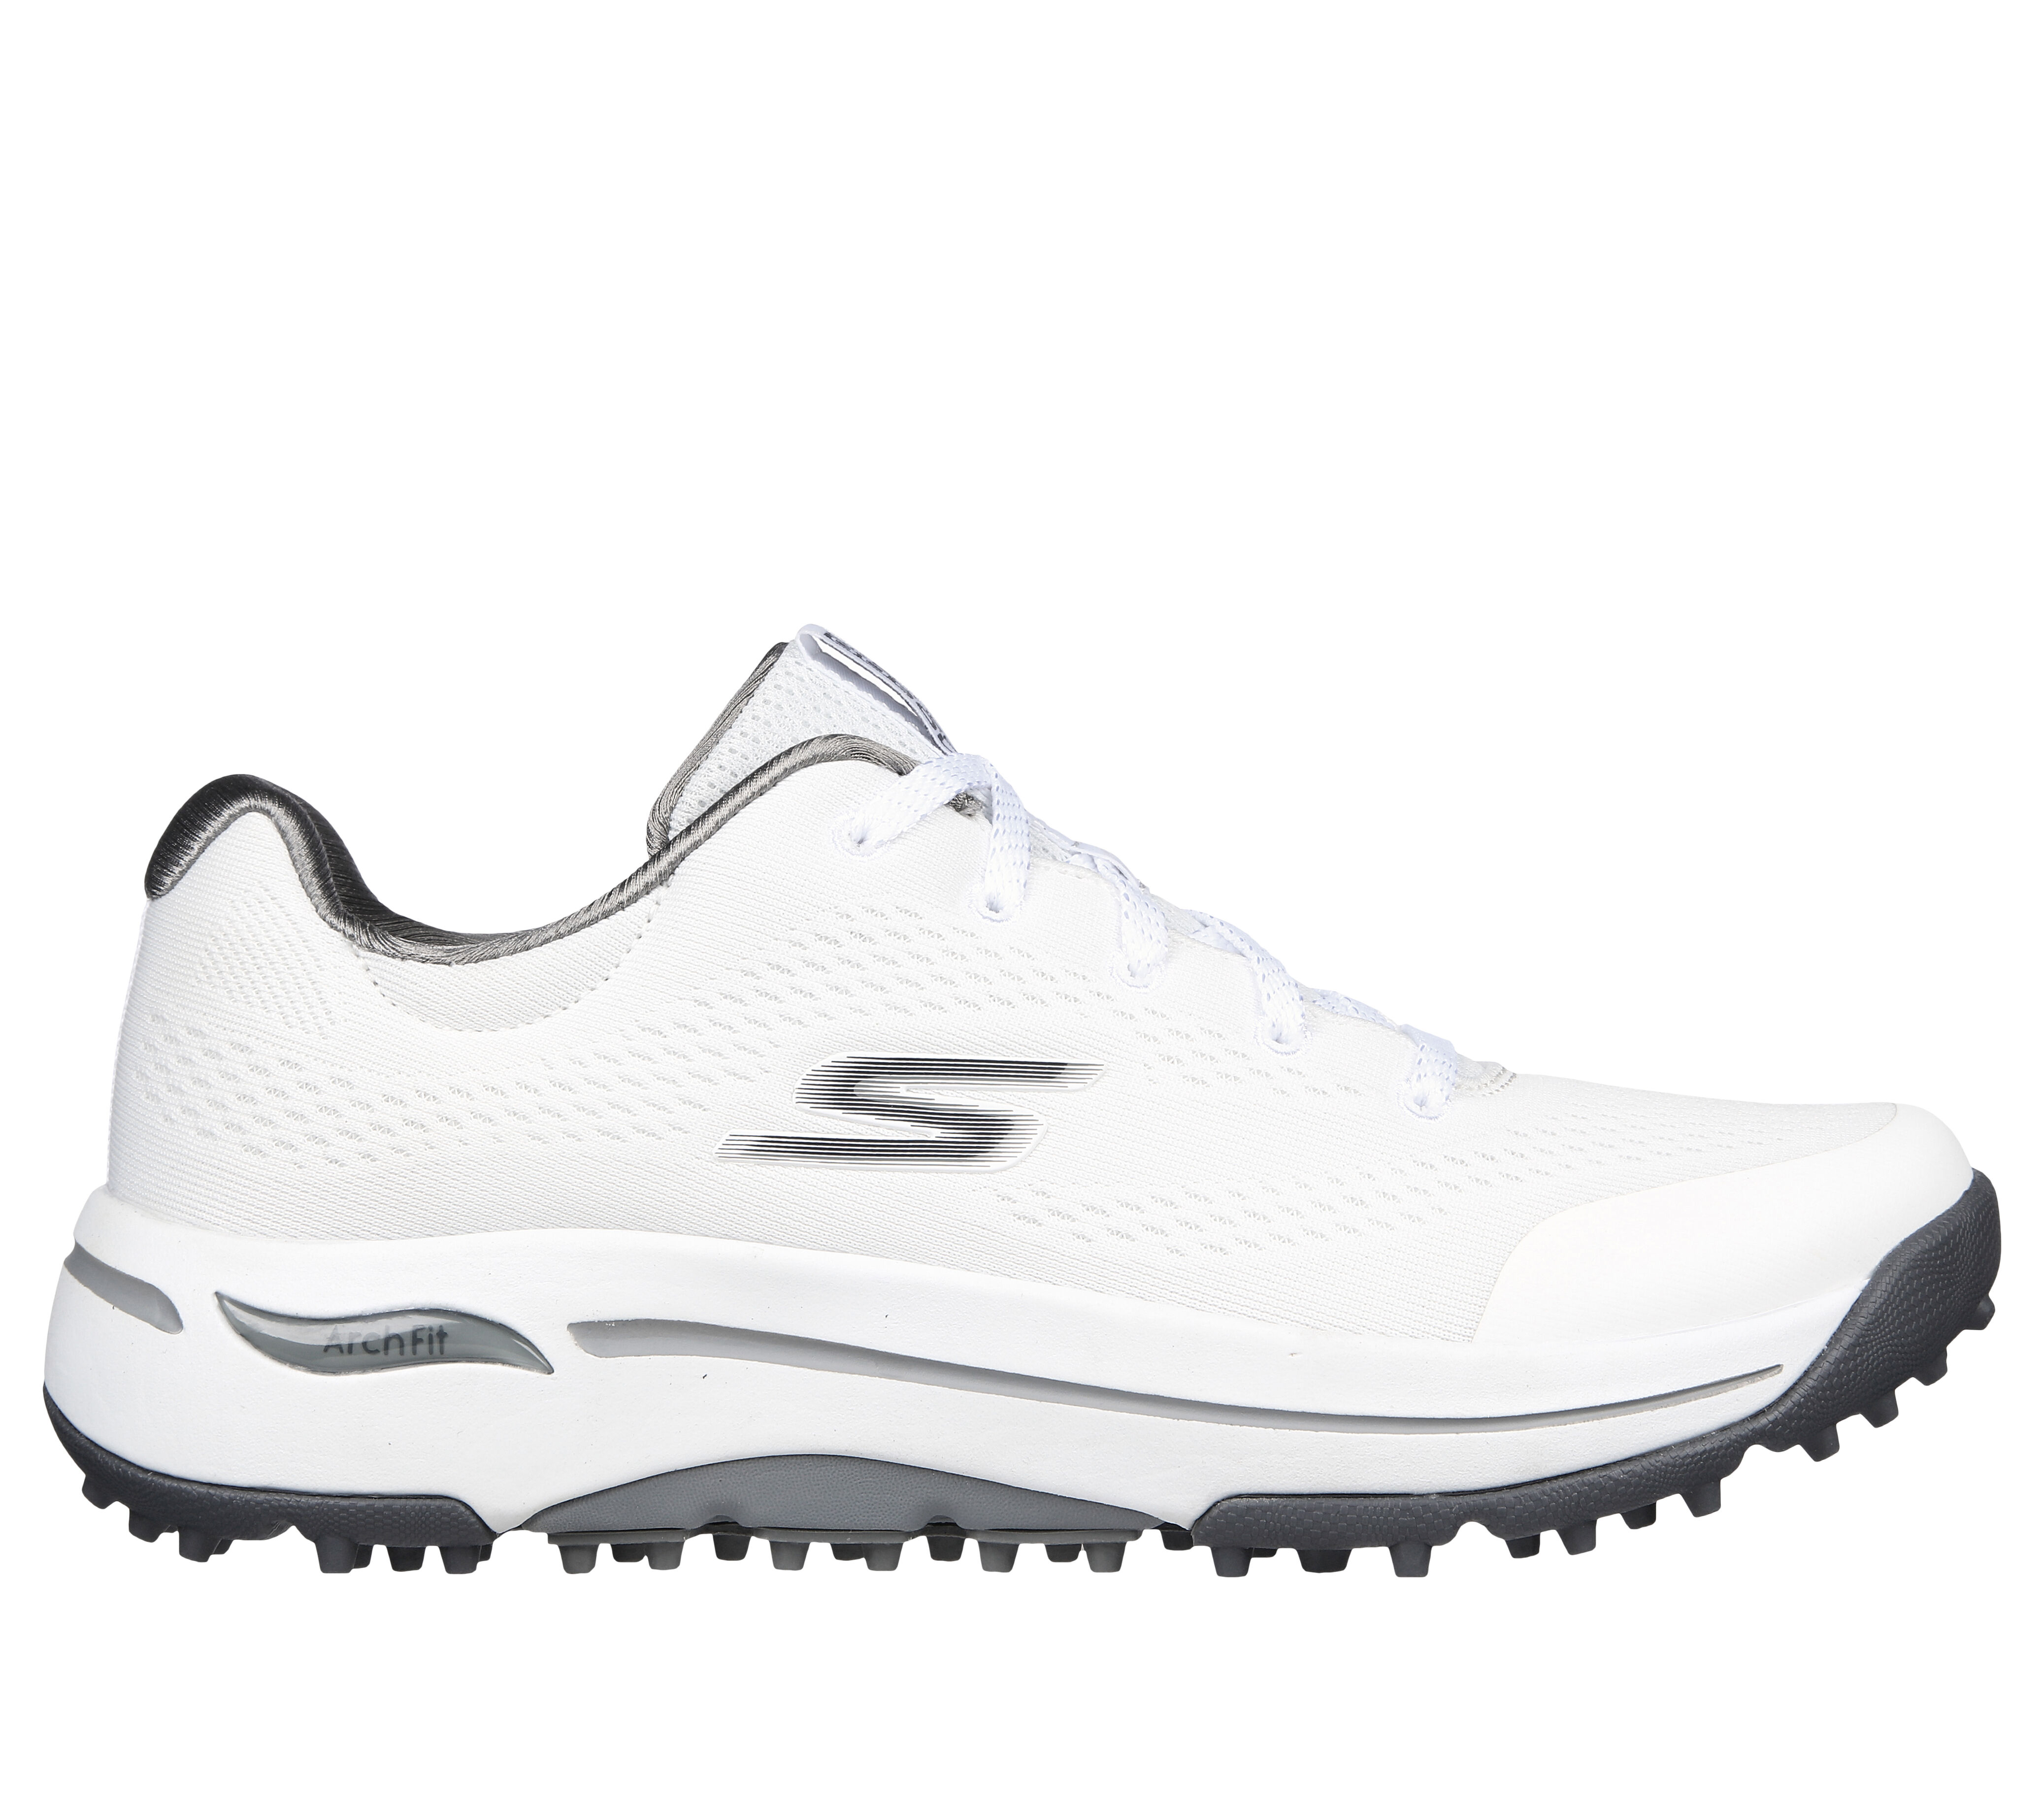 Skechers Womens GO GOLF Arch Fit Balance Golf Shoes White - Carl's Golfland